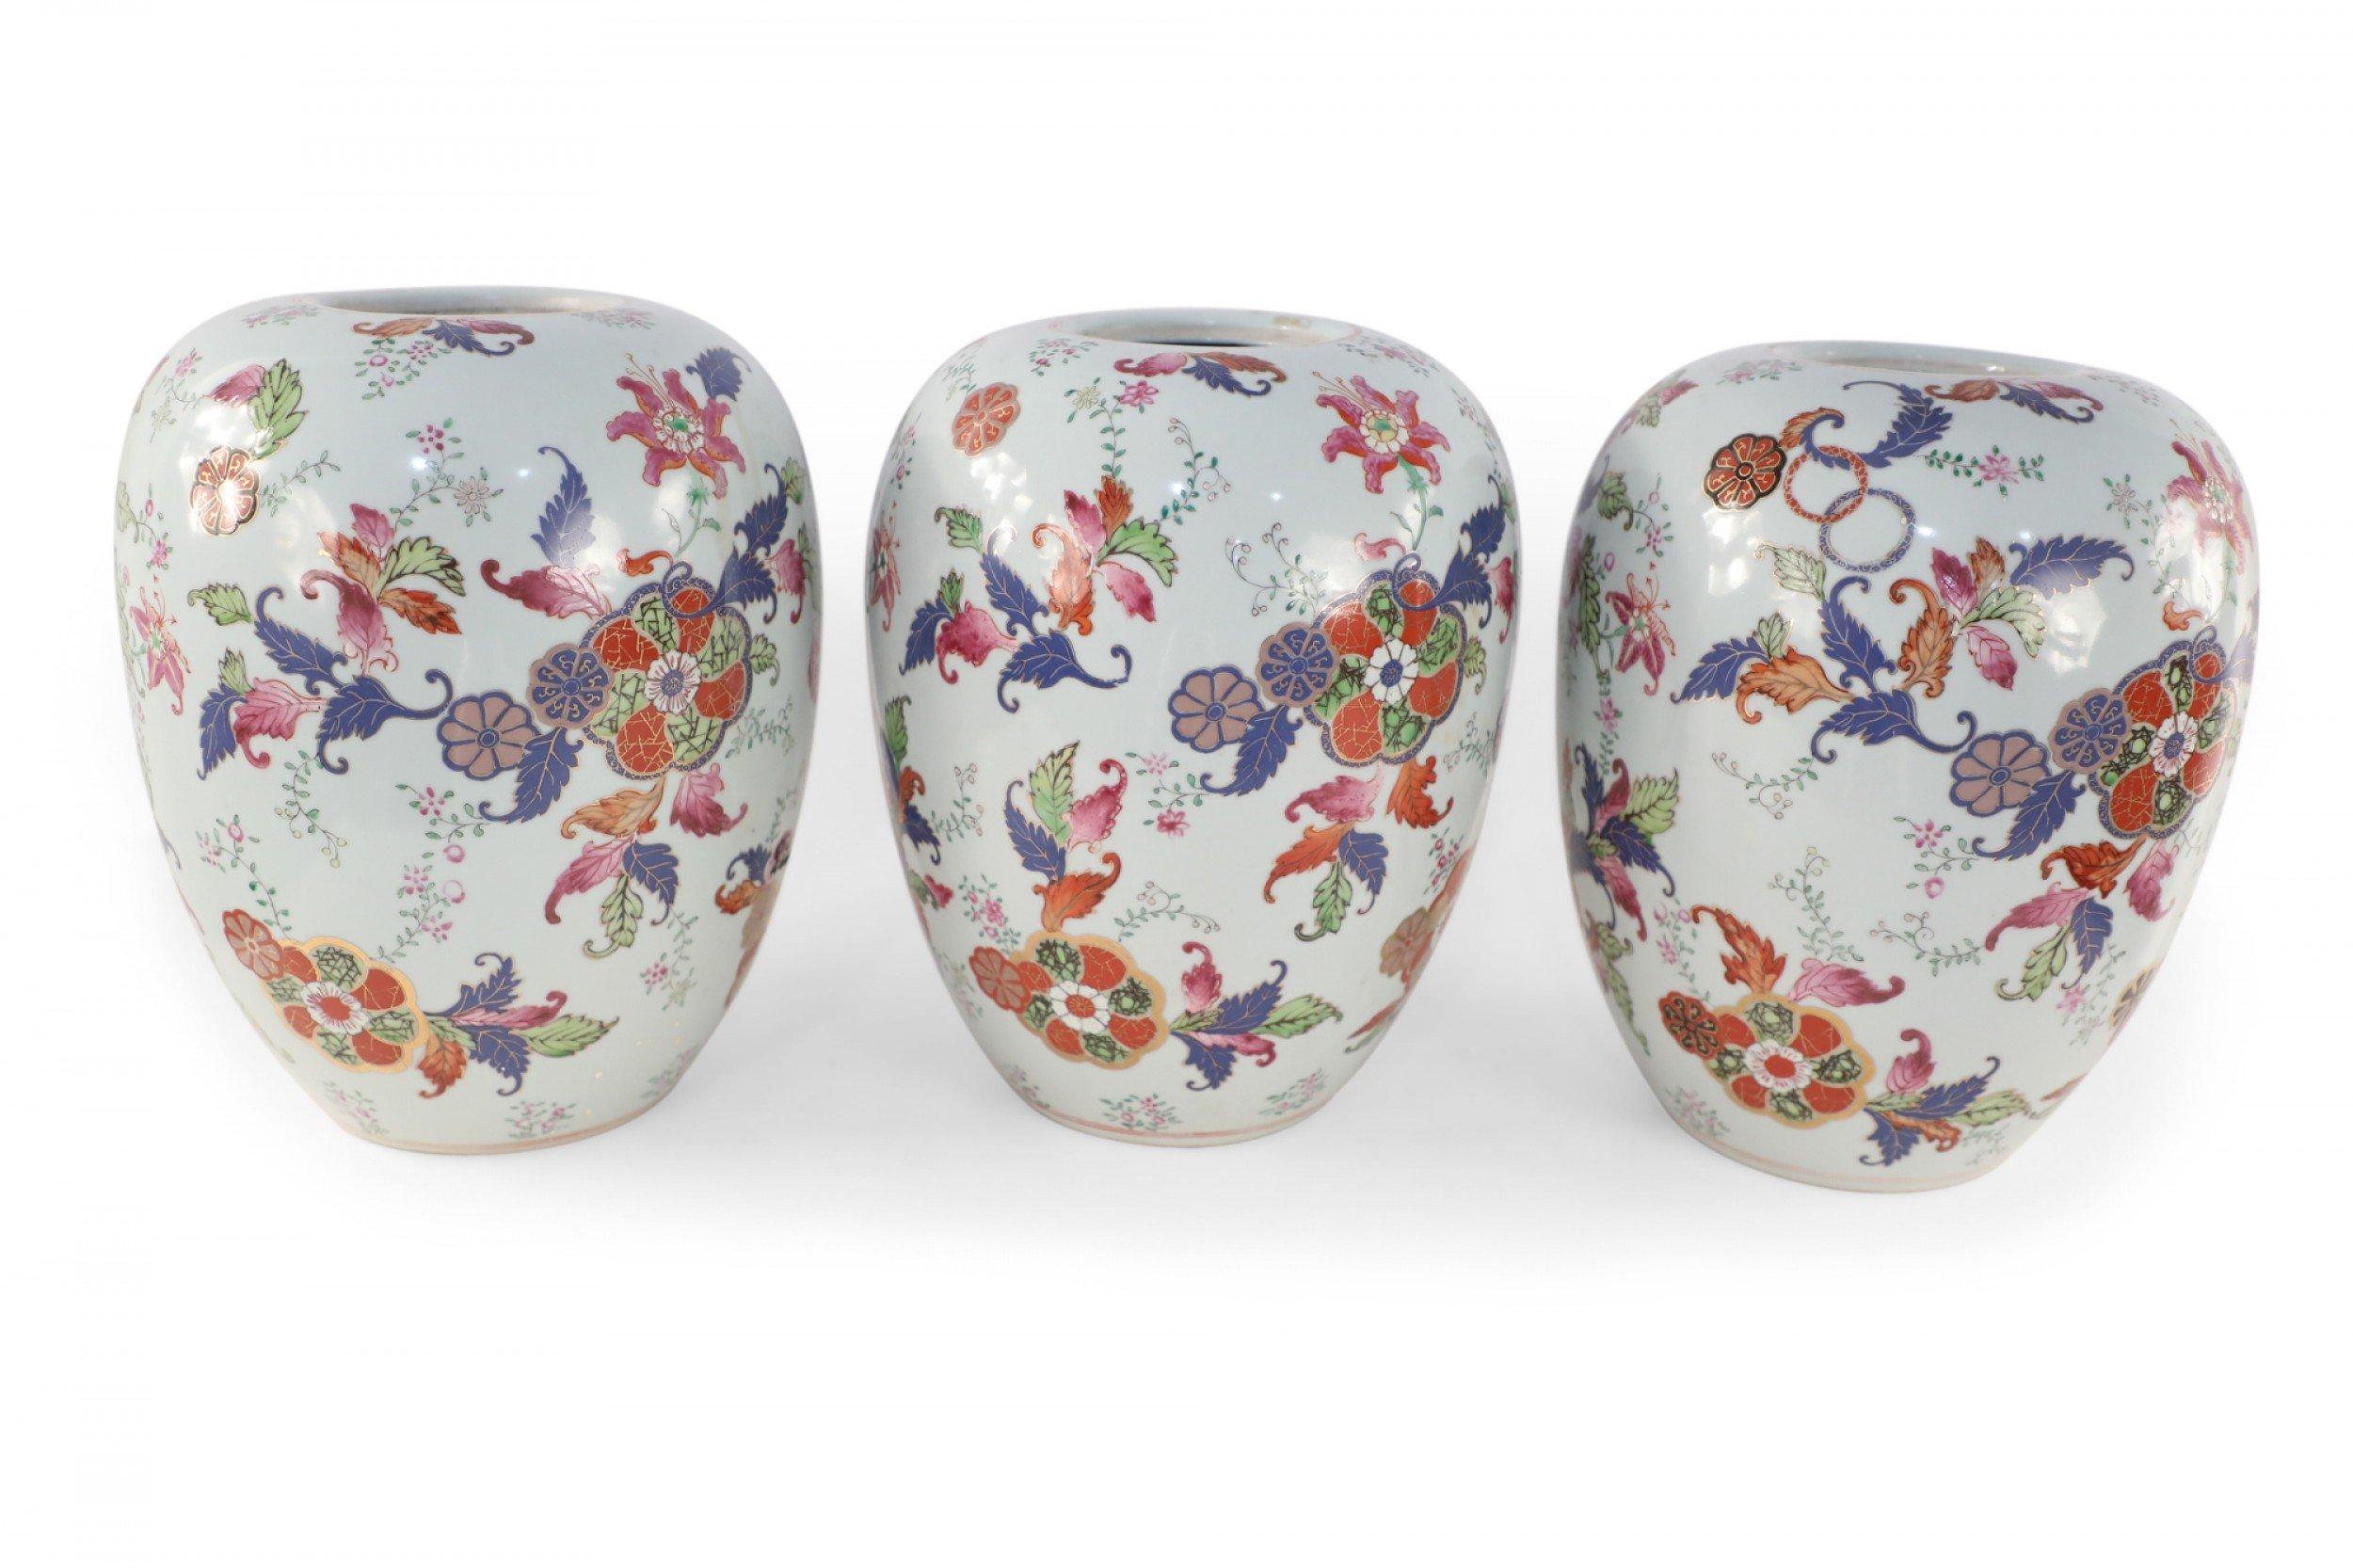 Chinese White and Floral Pattern Porcelain Jars For Sale 2